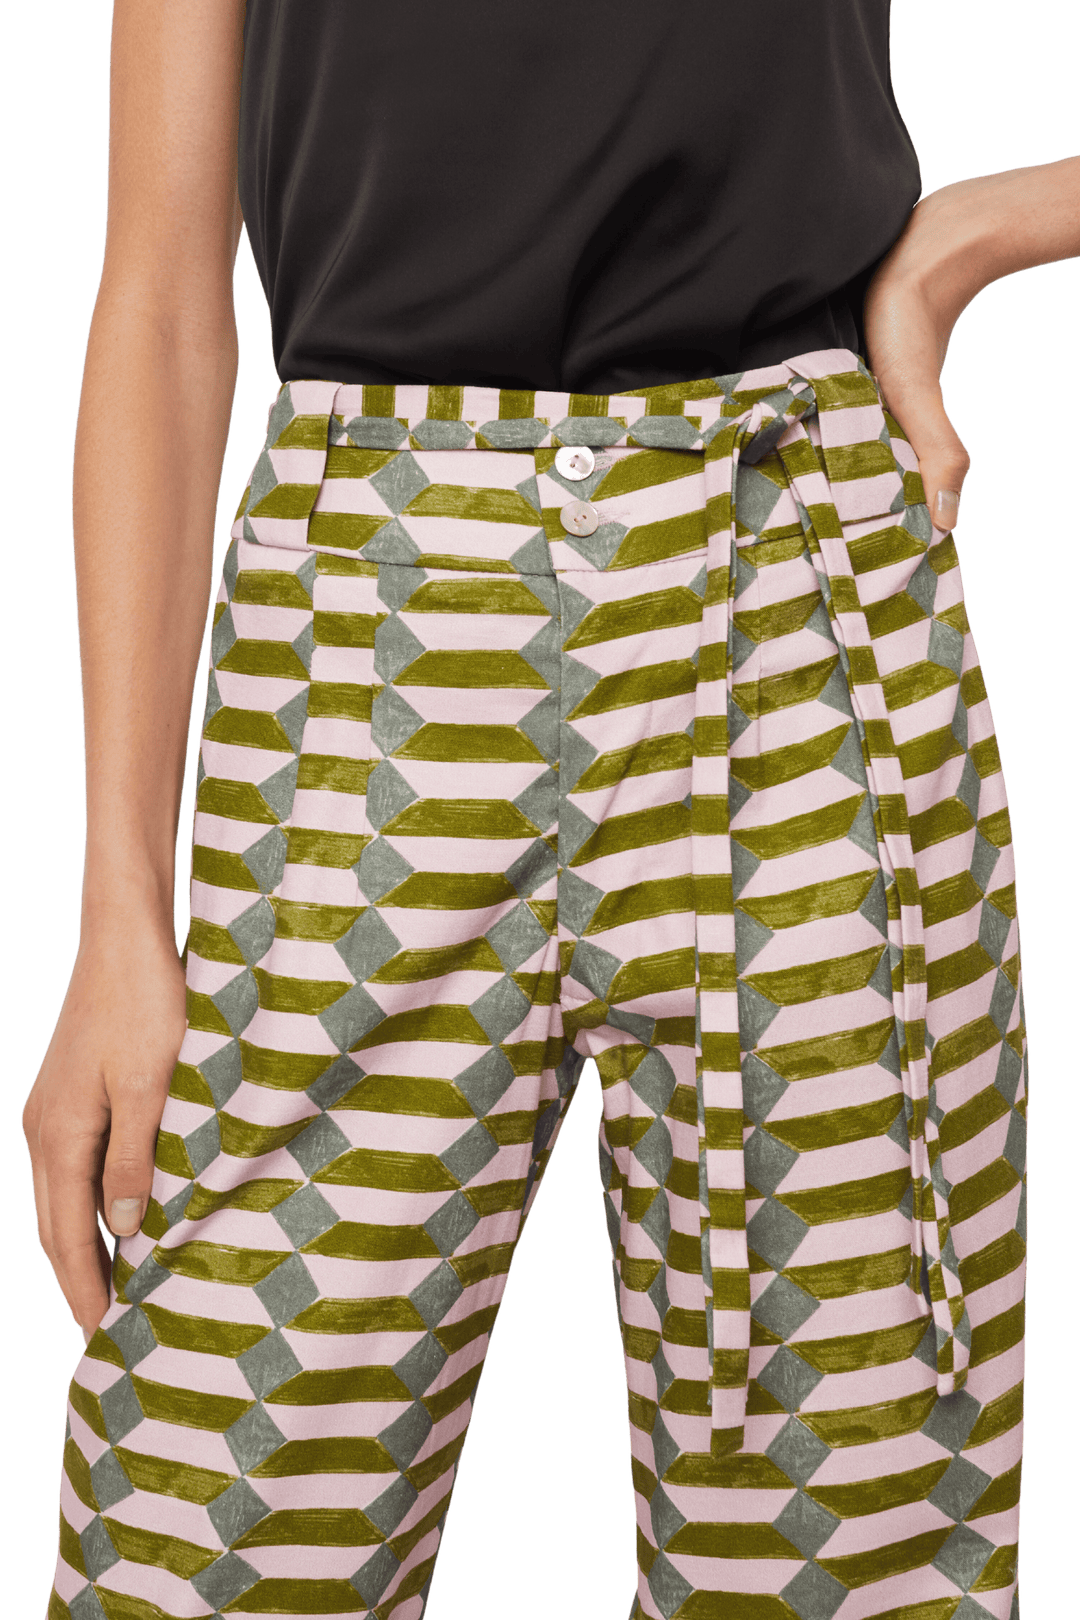 High-Waisted Chino Trousers with Drawstring Waist in Geometric Orchid, Steel Blue, and Olive Green Twill - STEF MOUCHIE